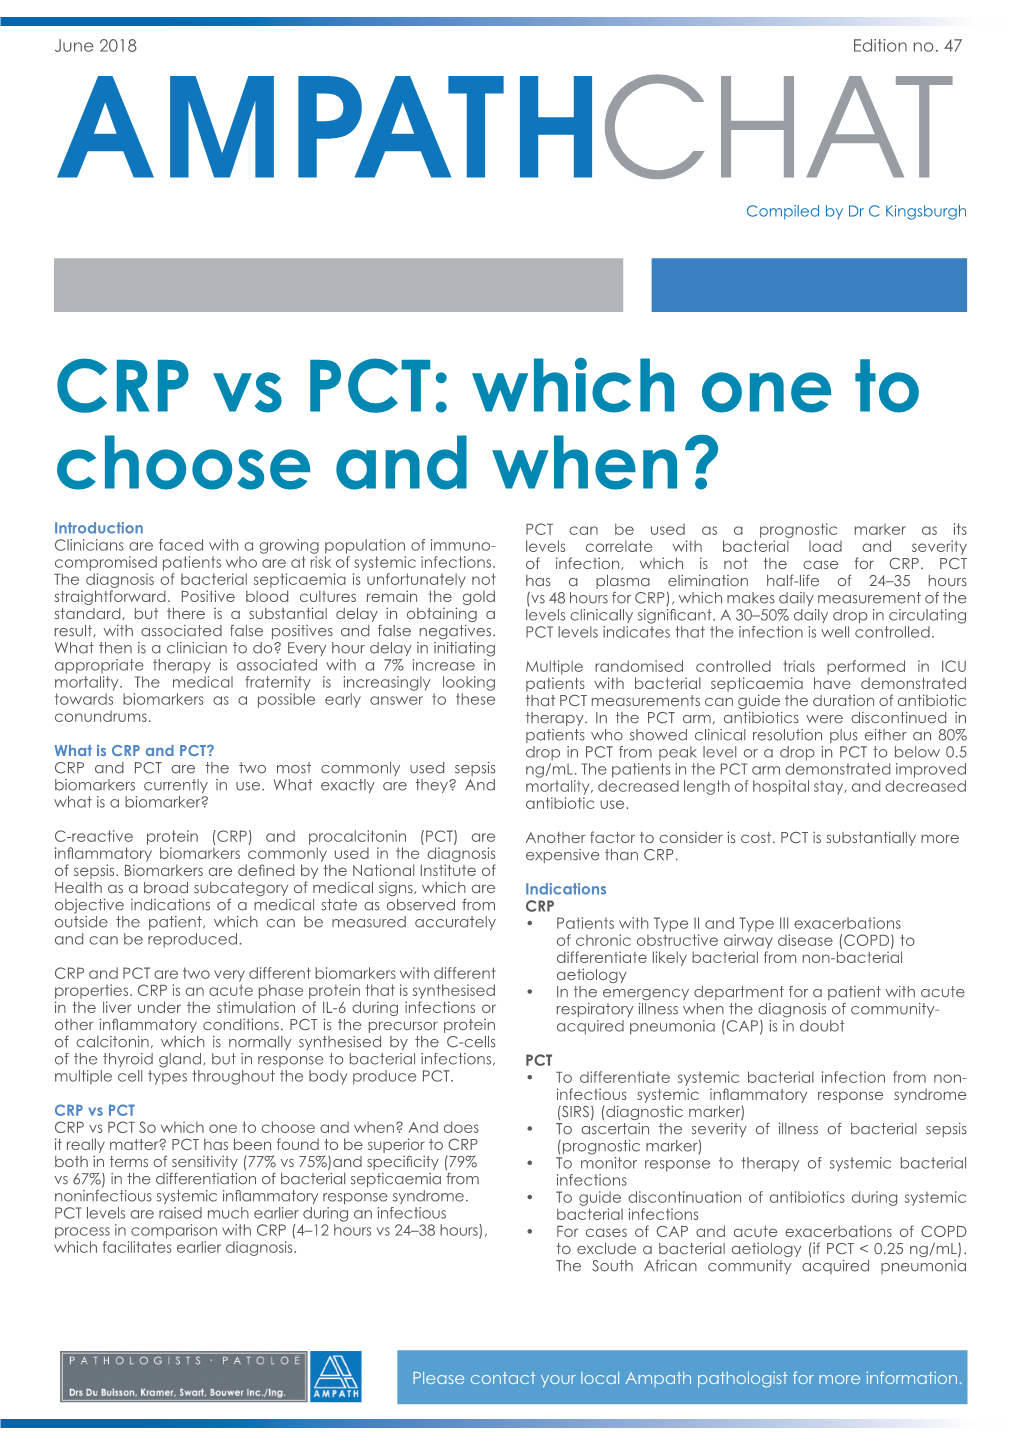 CRP Vs PCT: Which One to Choose and When?